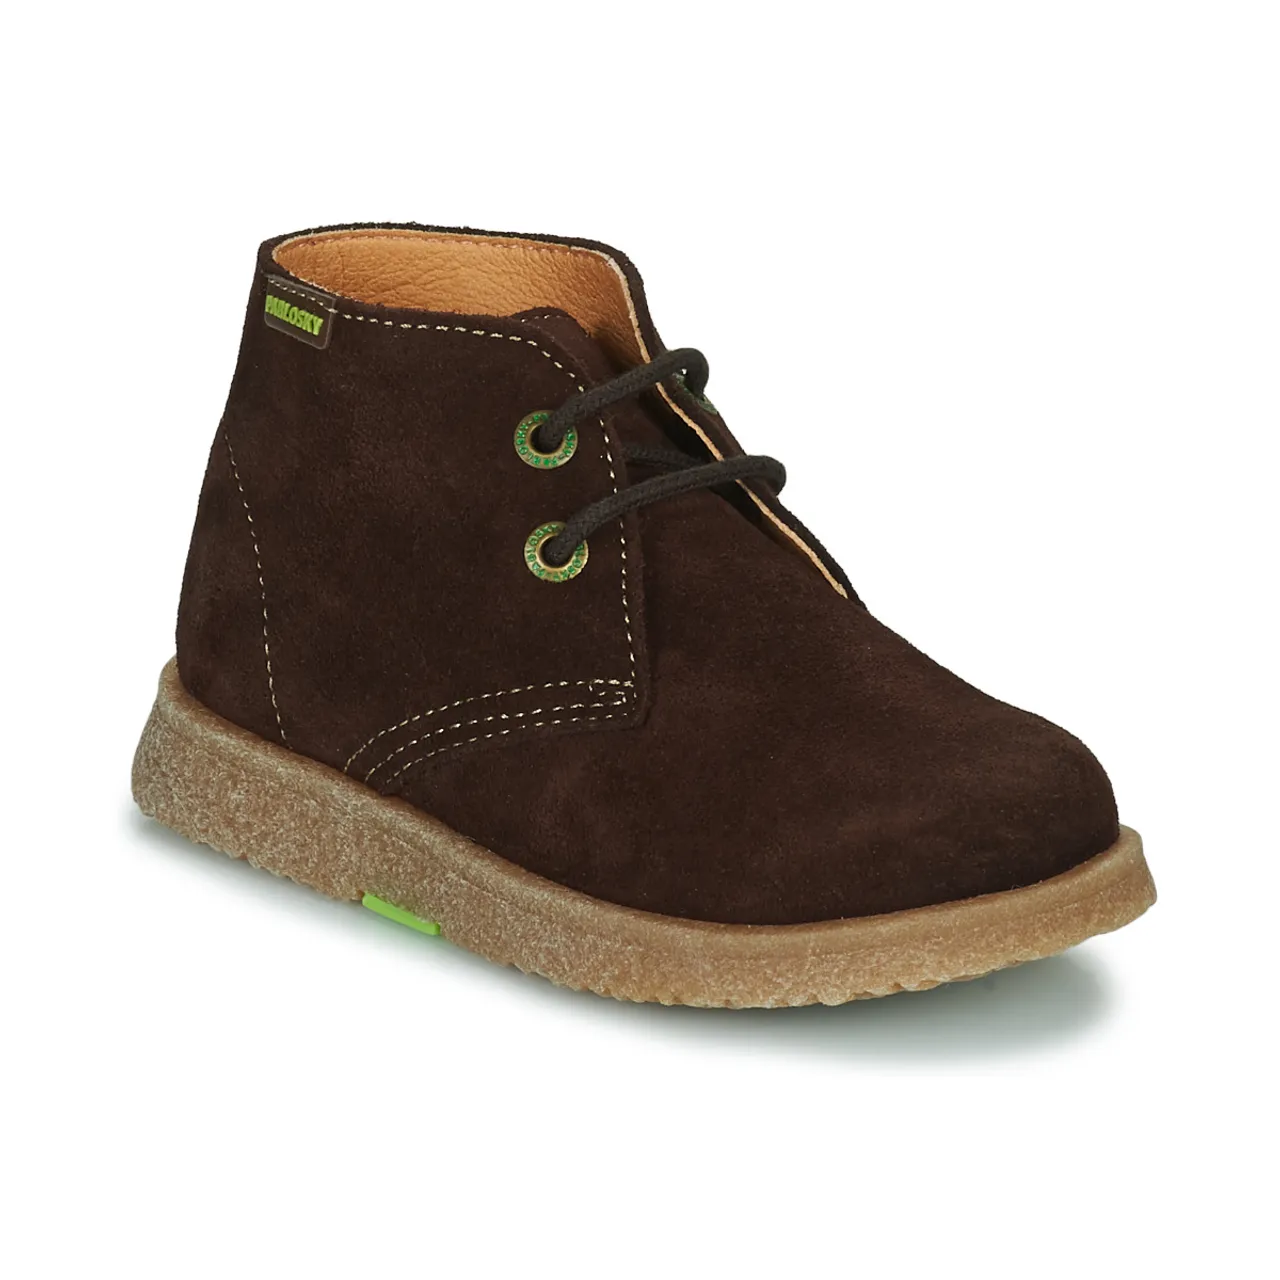 Pablosky  506396  boys's Children's Mid Boots in Brown